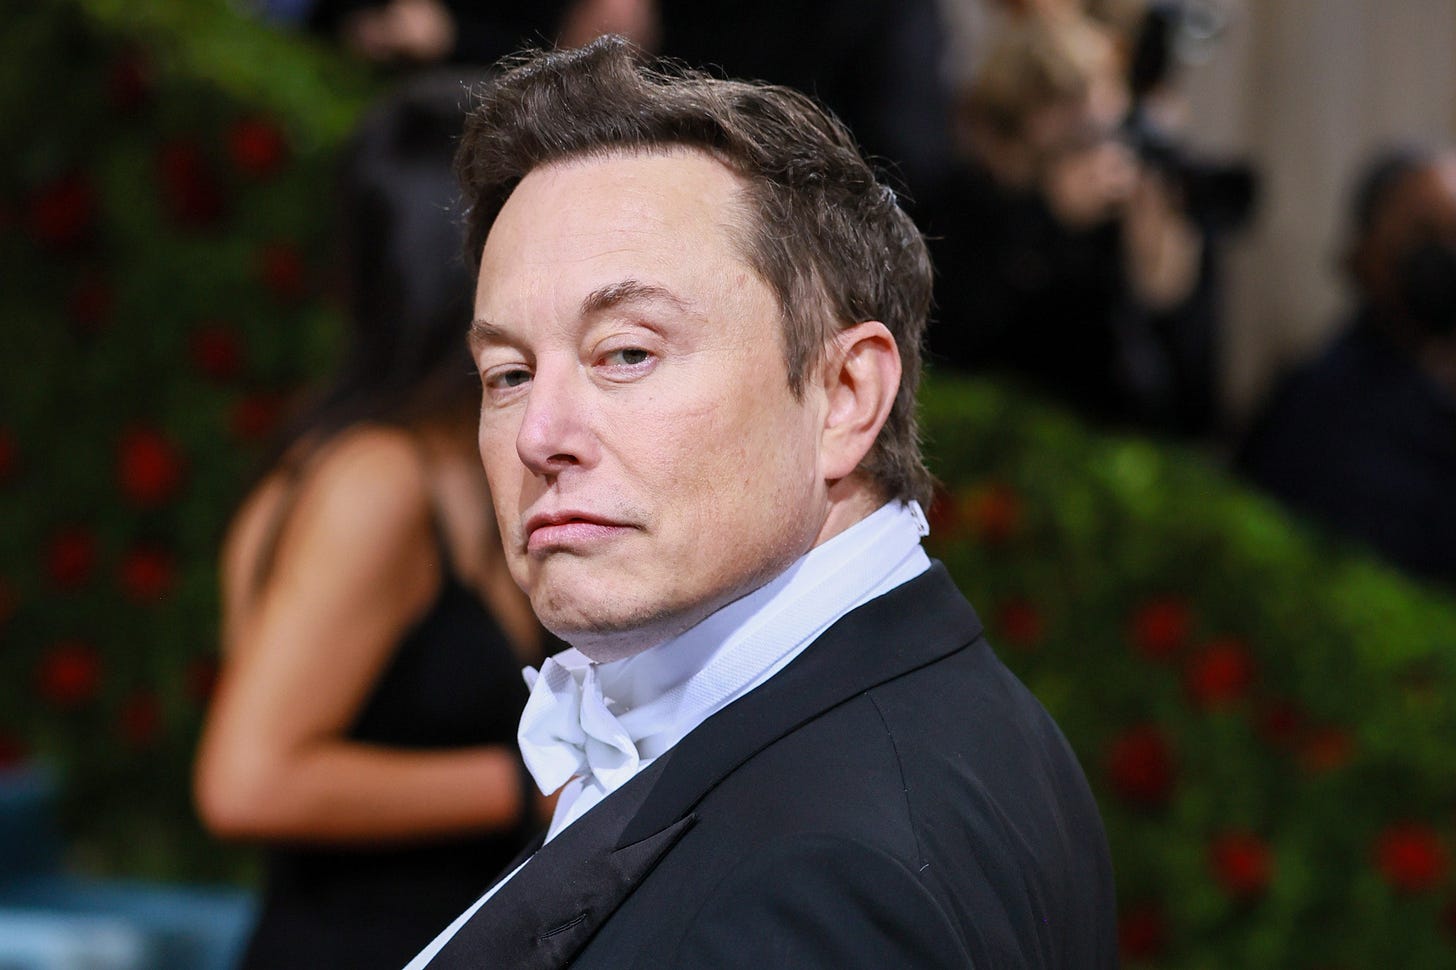 Elon Musk Getting Twitter Fire-Hose Data Raises Privacy Concerns | WIRED